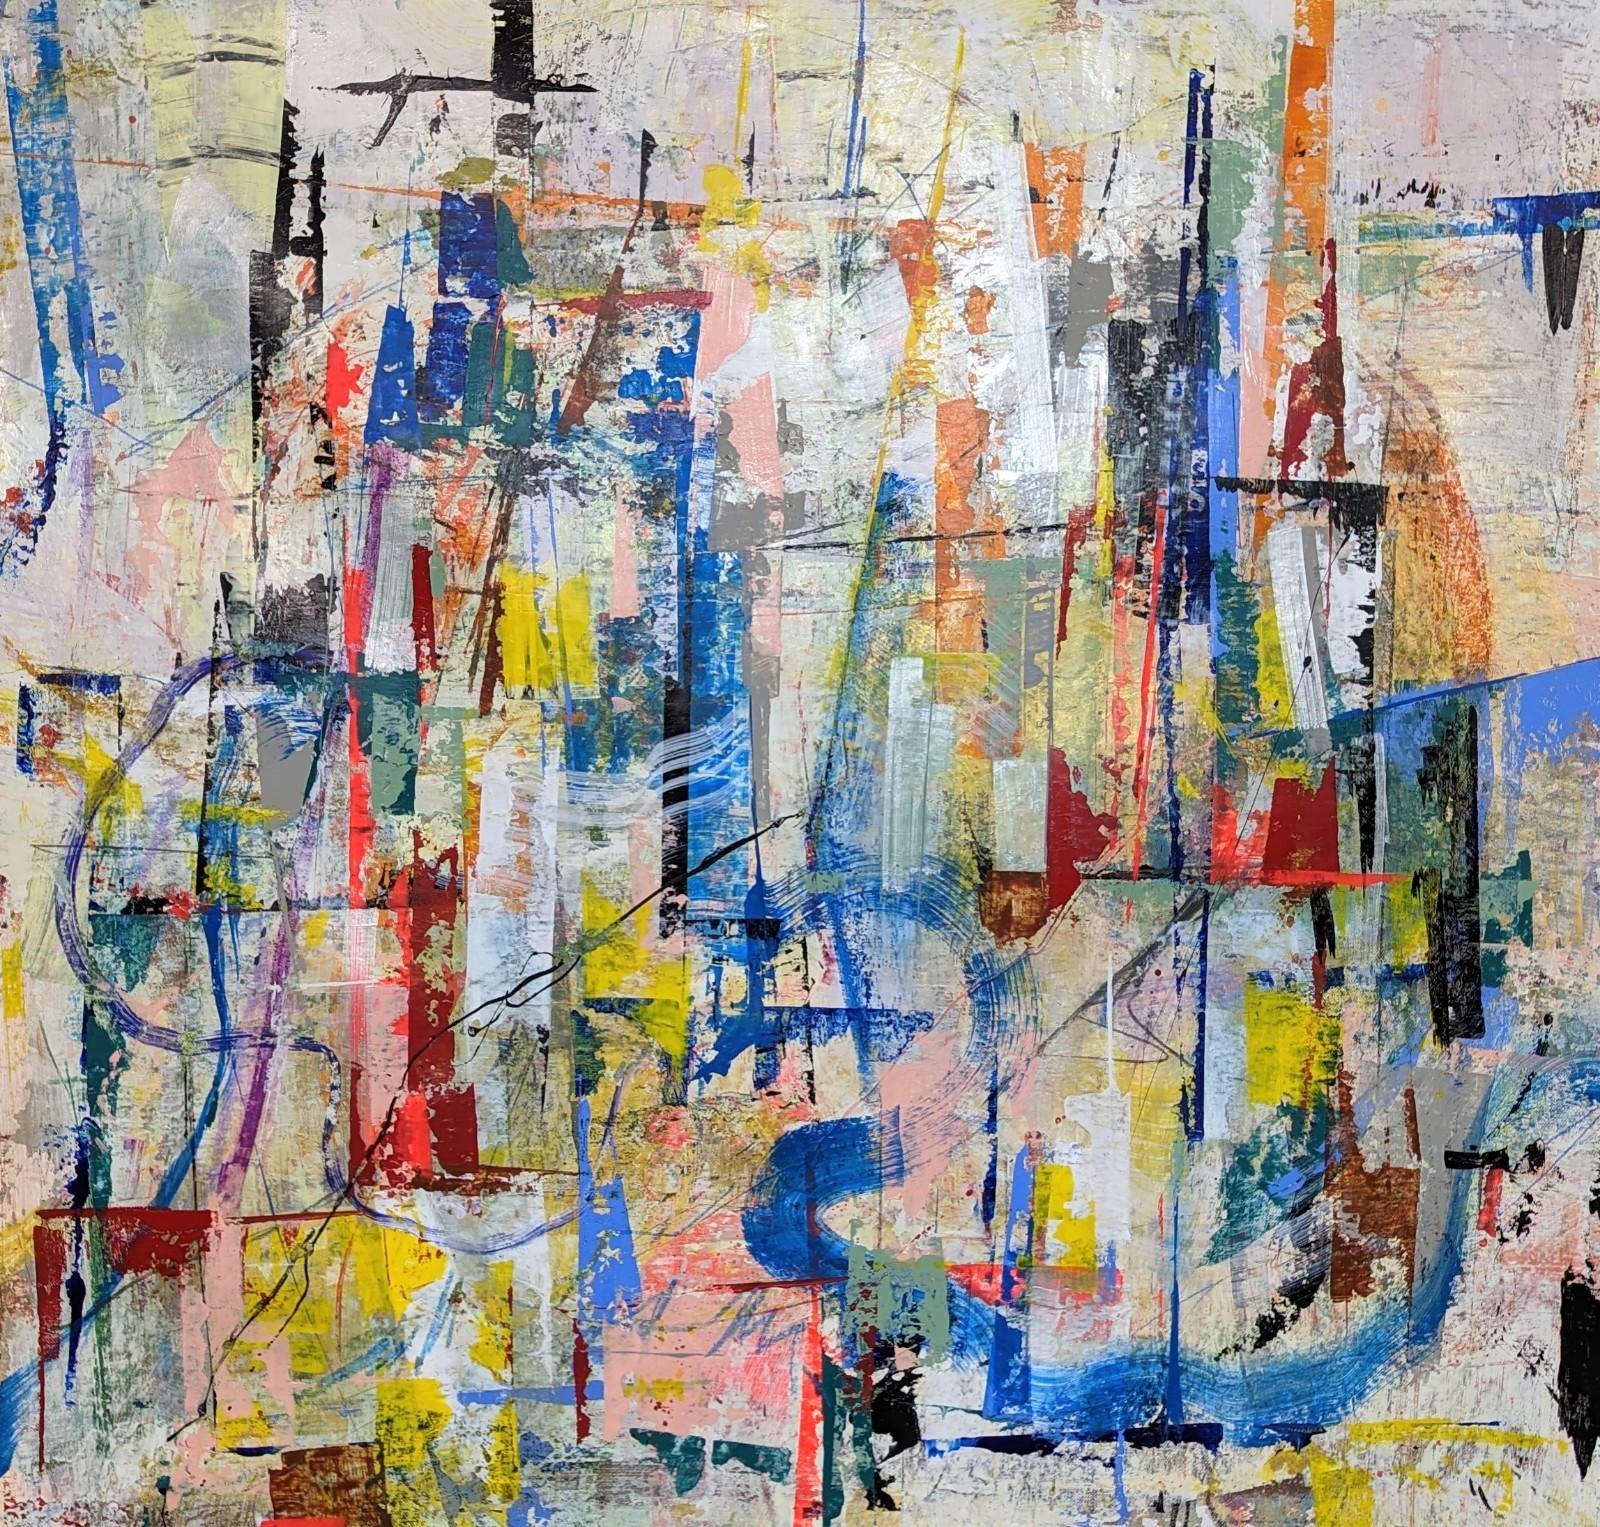 Chi Town II by Joseph Conrad-Ferm, 2023
Mixed medium painting on canvas
W 32" x H 32"

Mixed medium painting on canvas by NY-based artist Joseph Conrad-Ferm.

Shipping is not included. See our shipping policies. Please contact us for shipping quotes